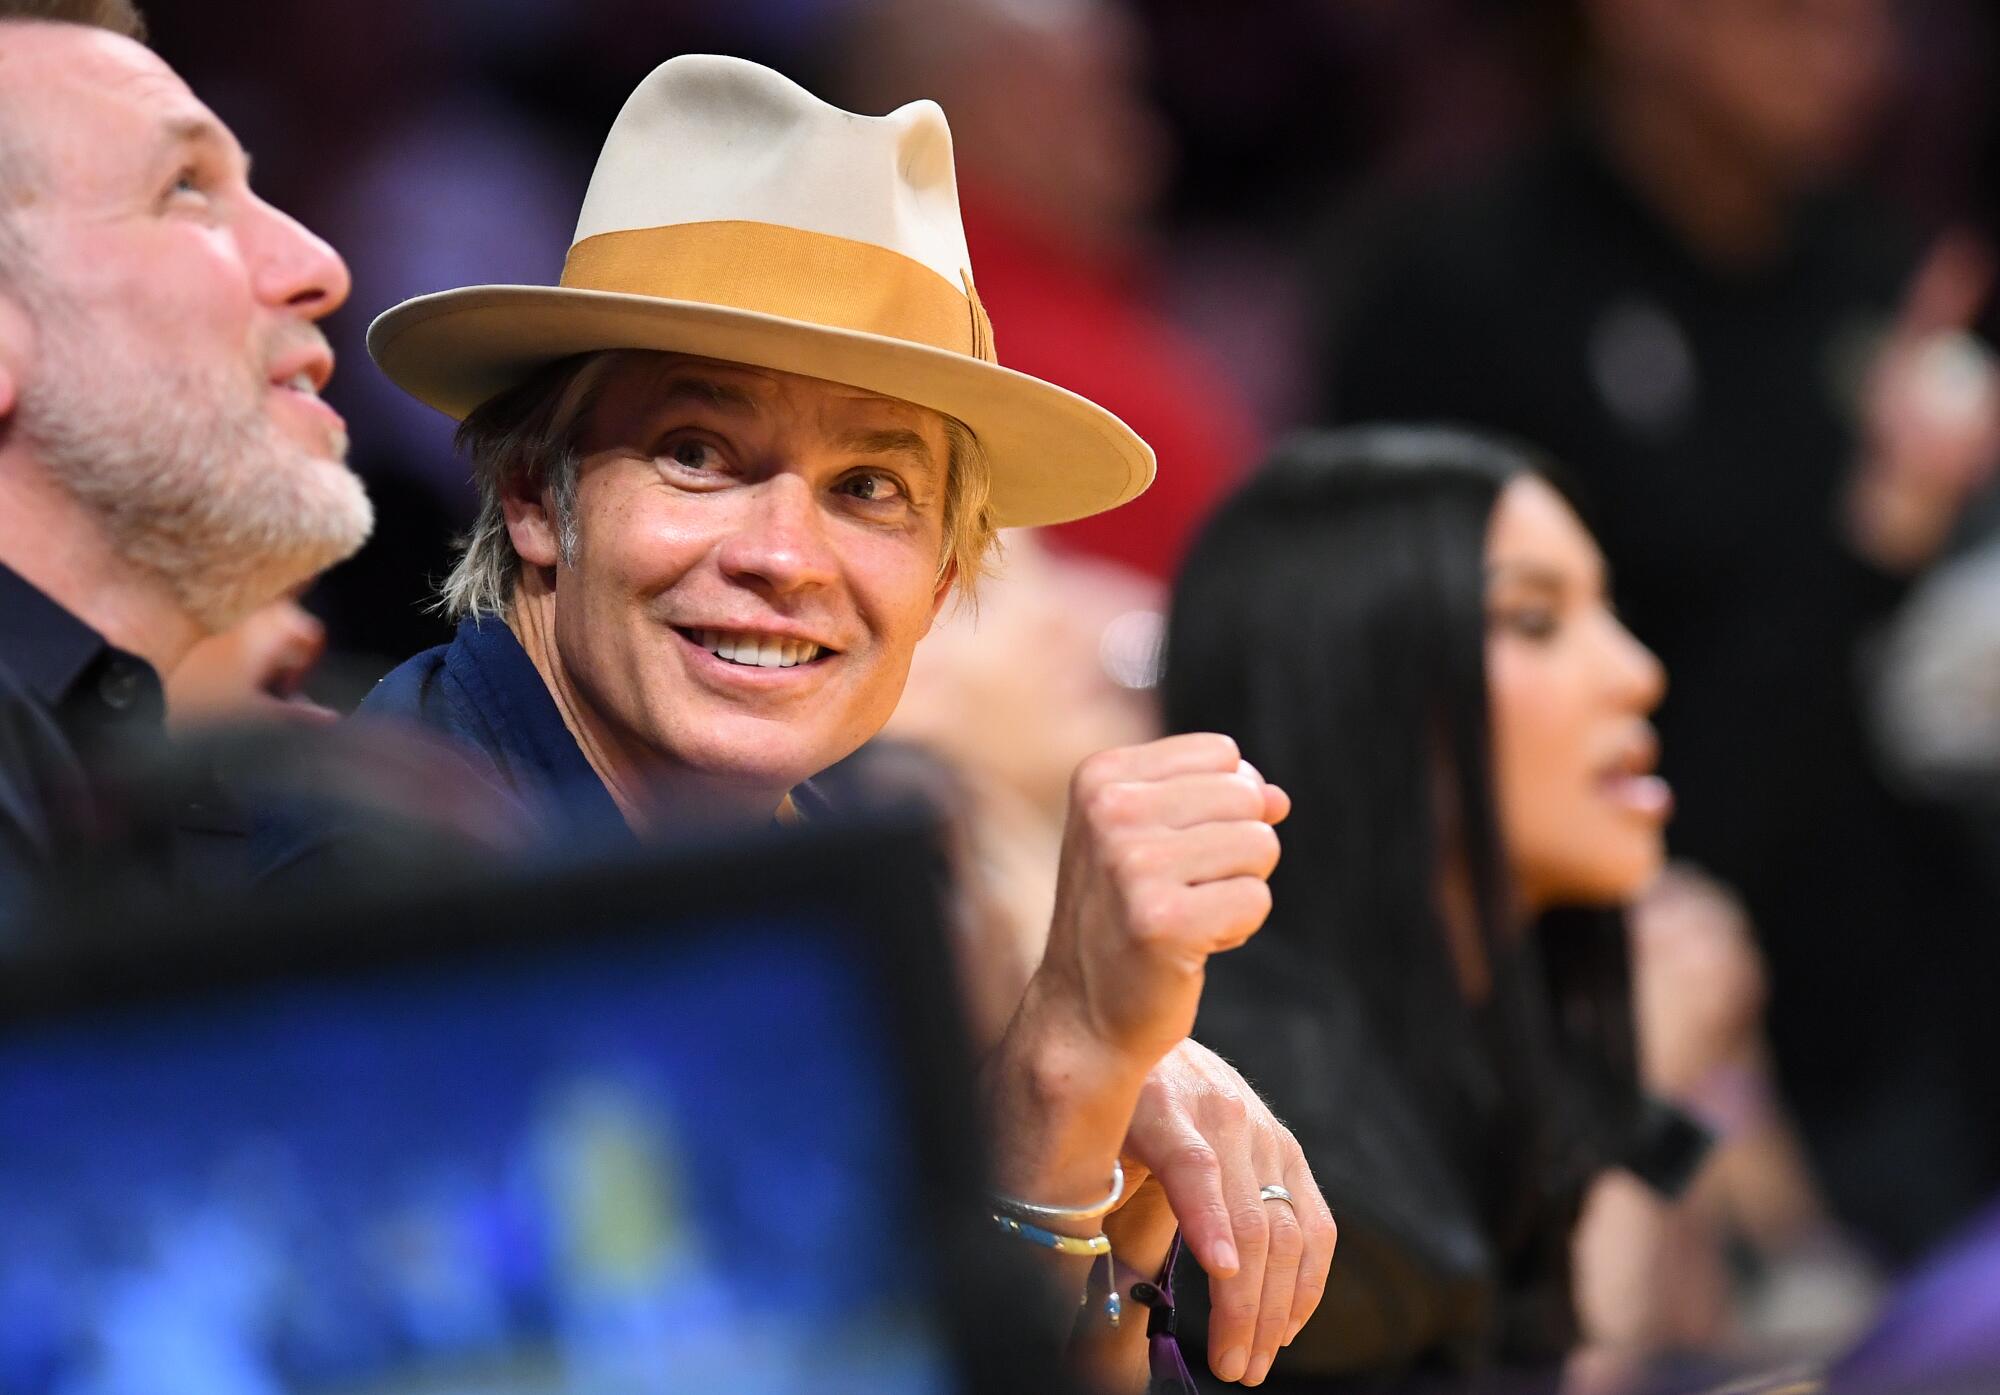 Timothy Olyphant attends a basketball game.